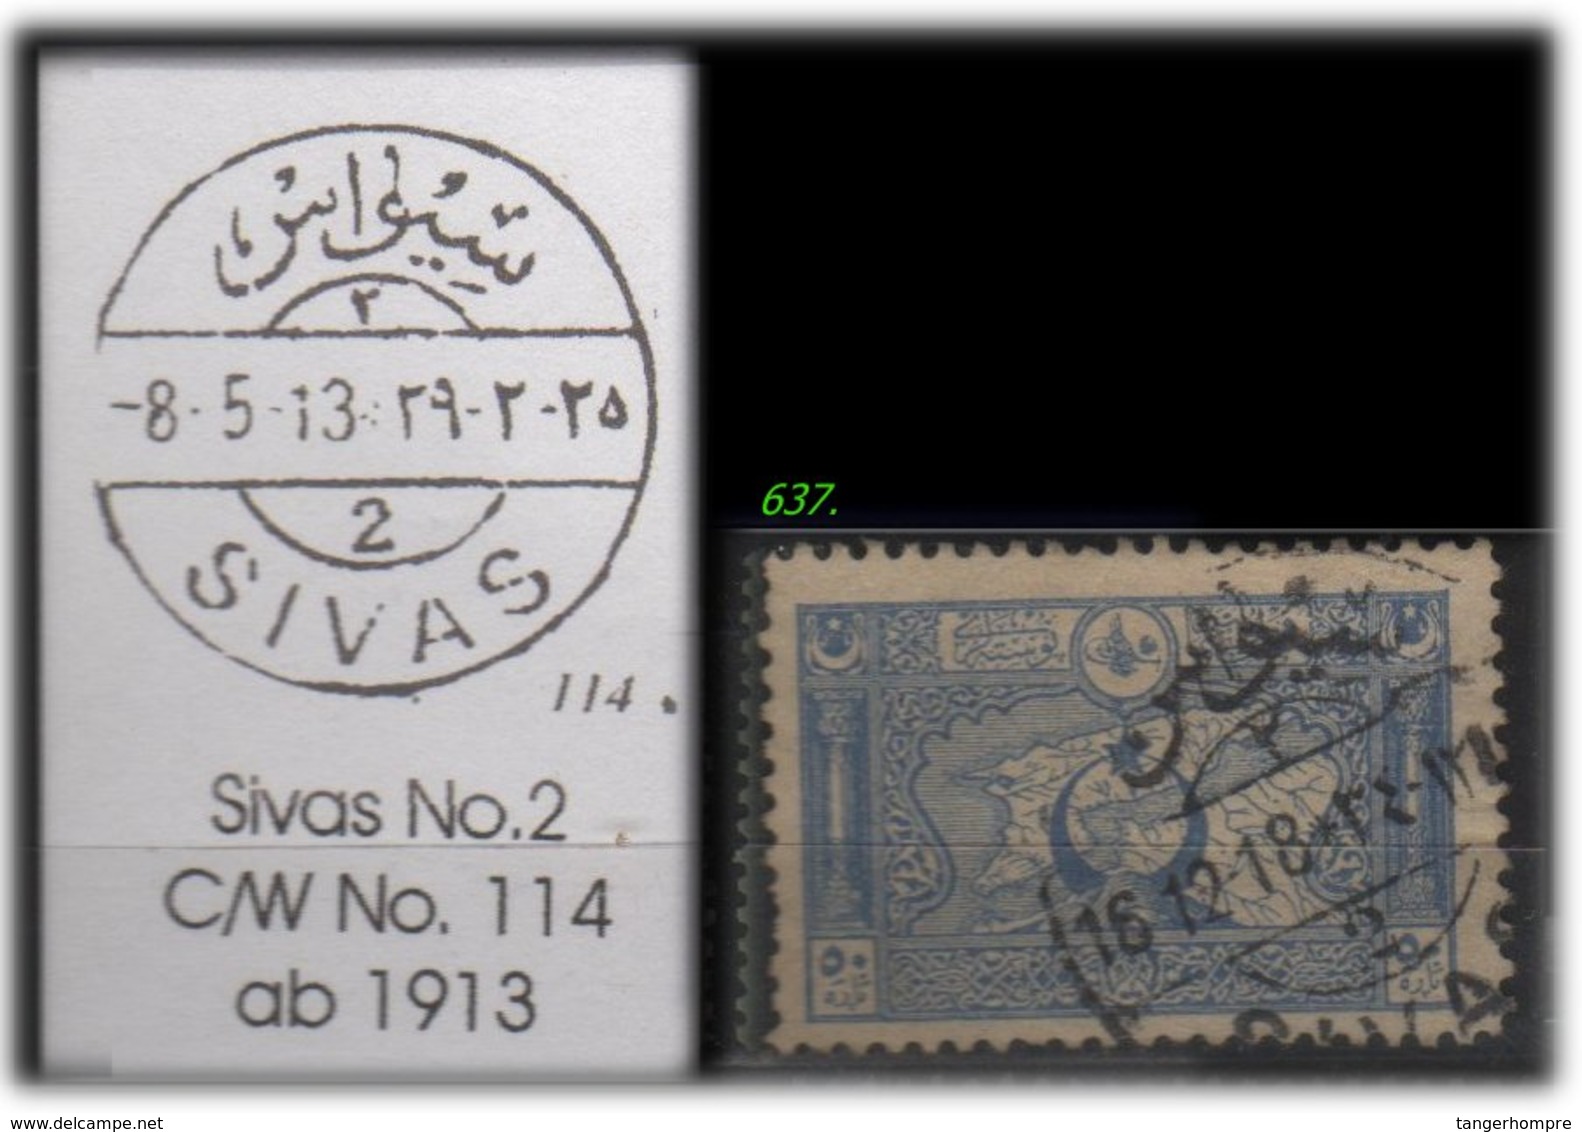 EARLY OTTOMAN SPECIALIZED FOR SPECIALIST, SEE....Stempel - SIVAS - Gebraucht